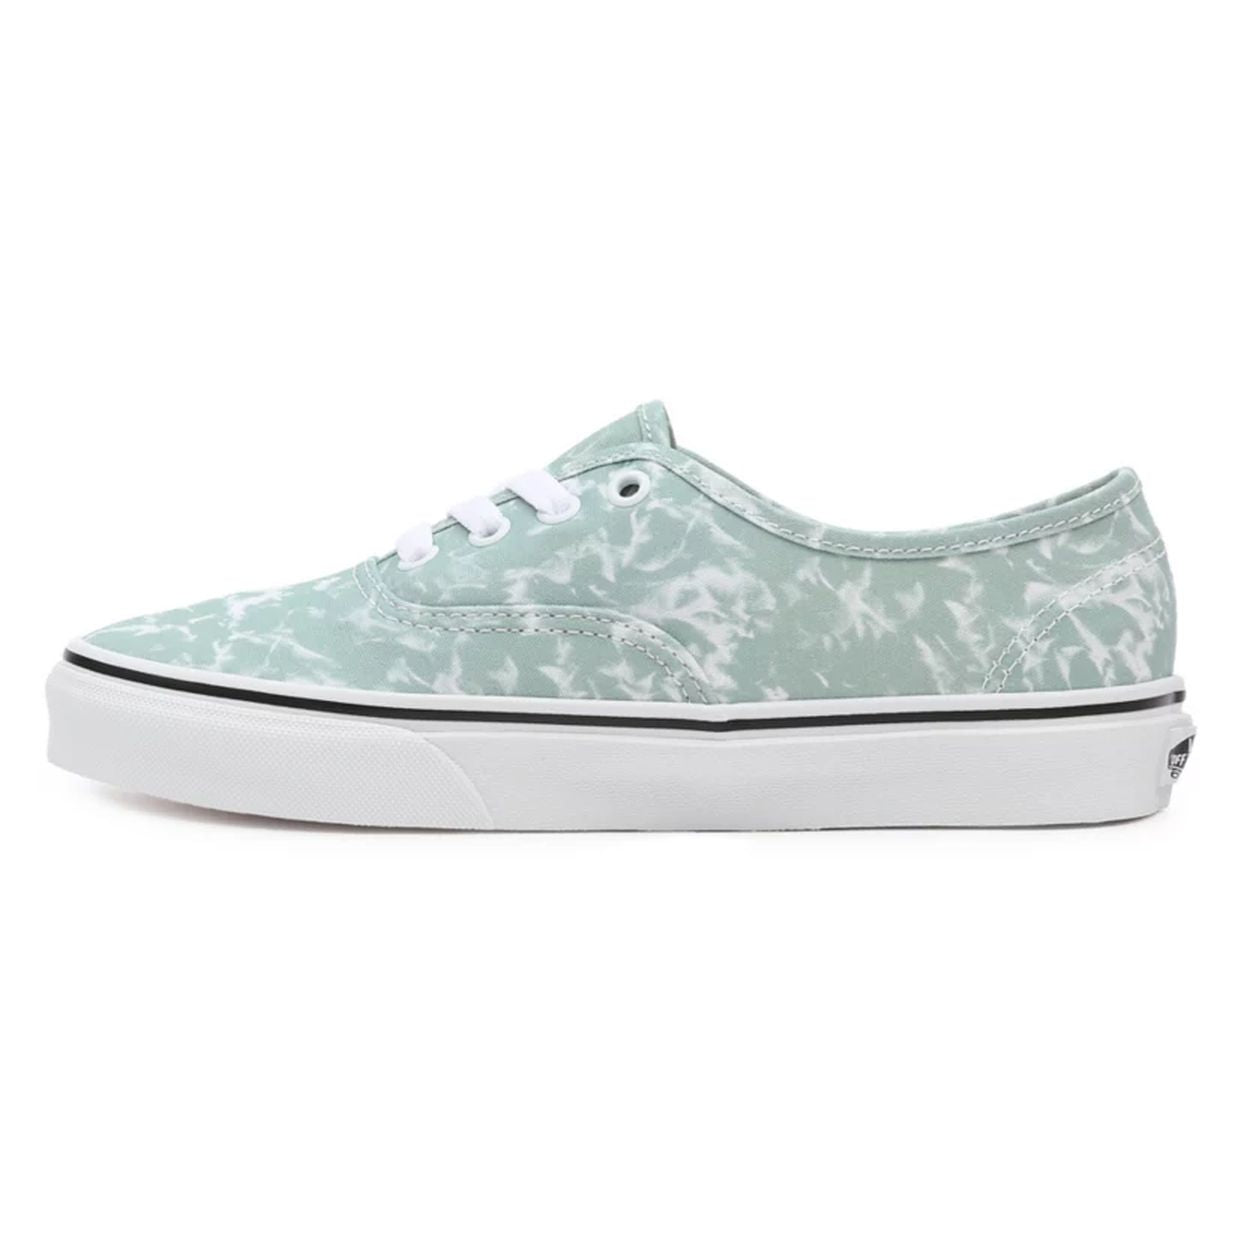 Authentic Vans in Farbe celadon green/ true White